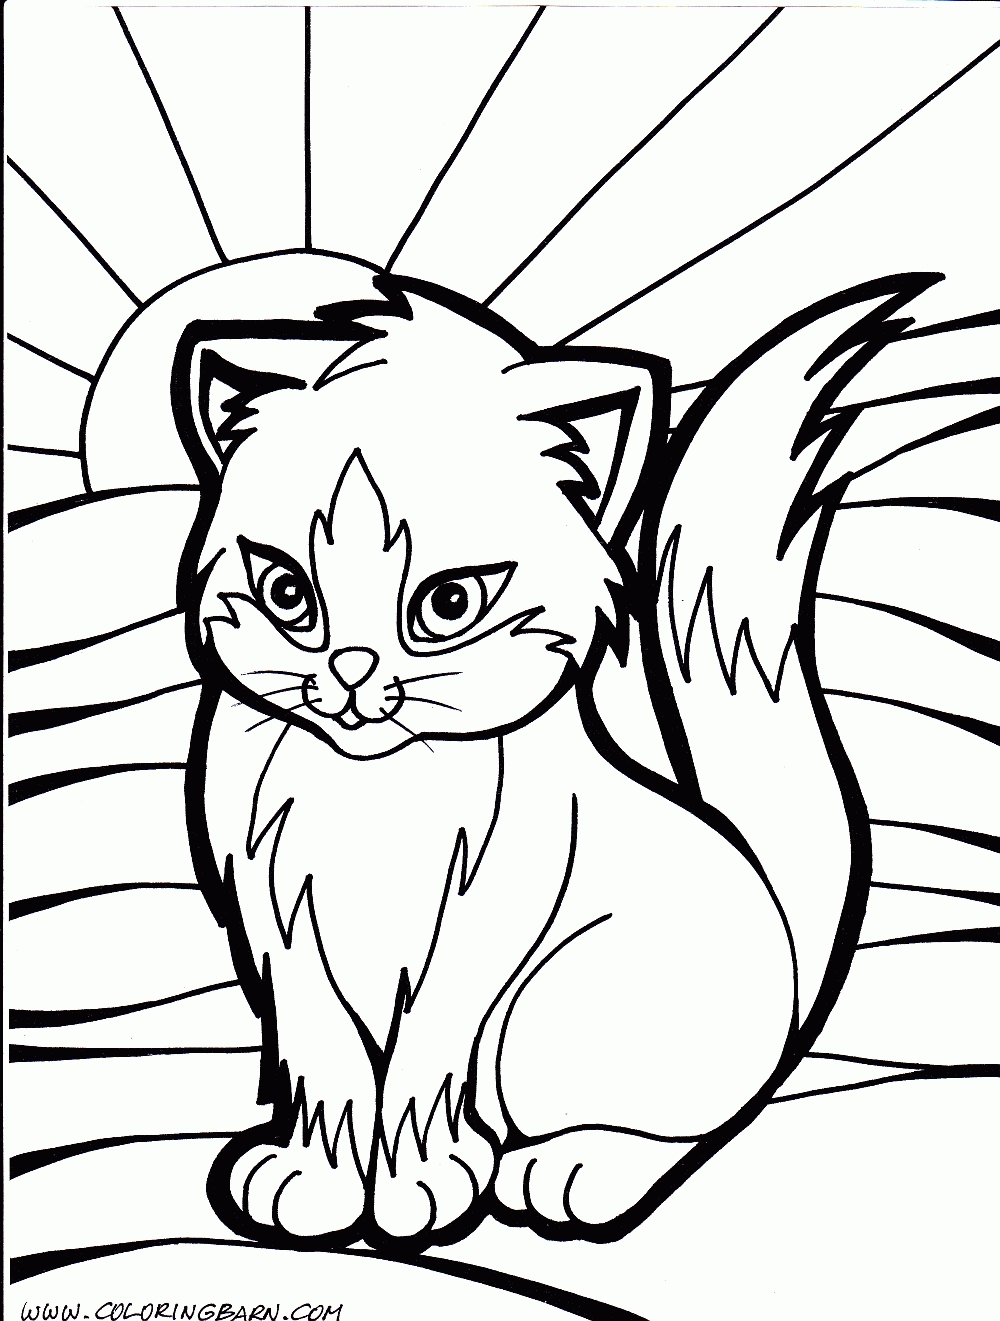 Coloring Pages Of Cute Cats at GetDrawings | Free download